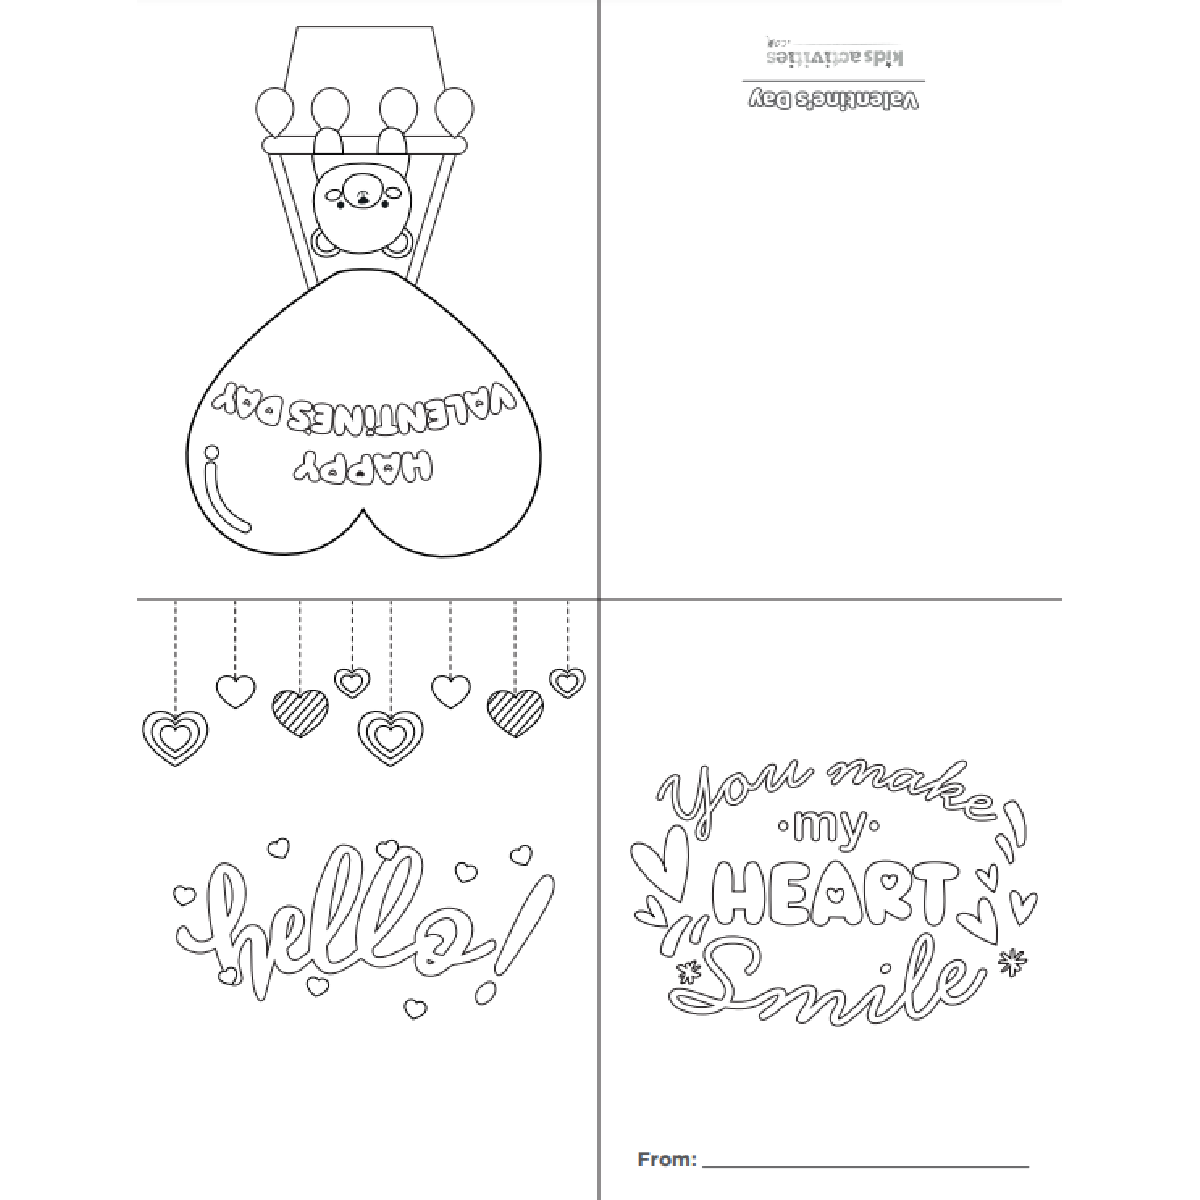 Cute valentine coloring cards